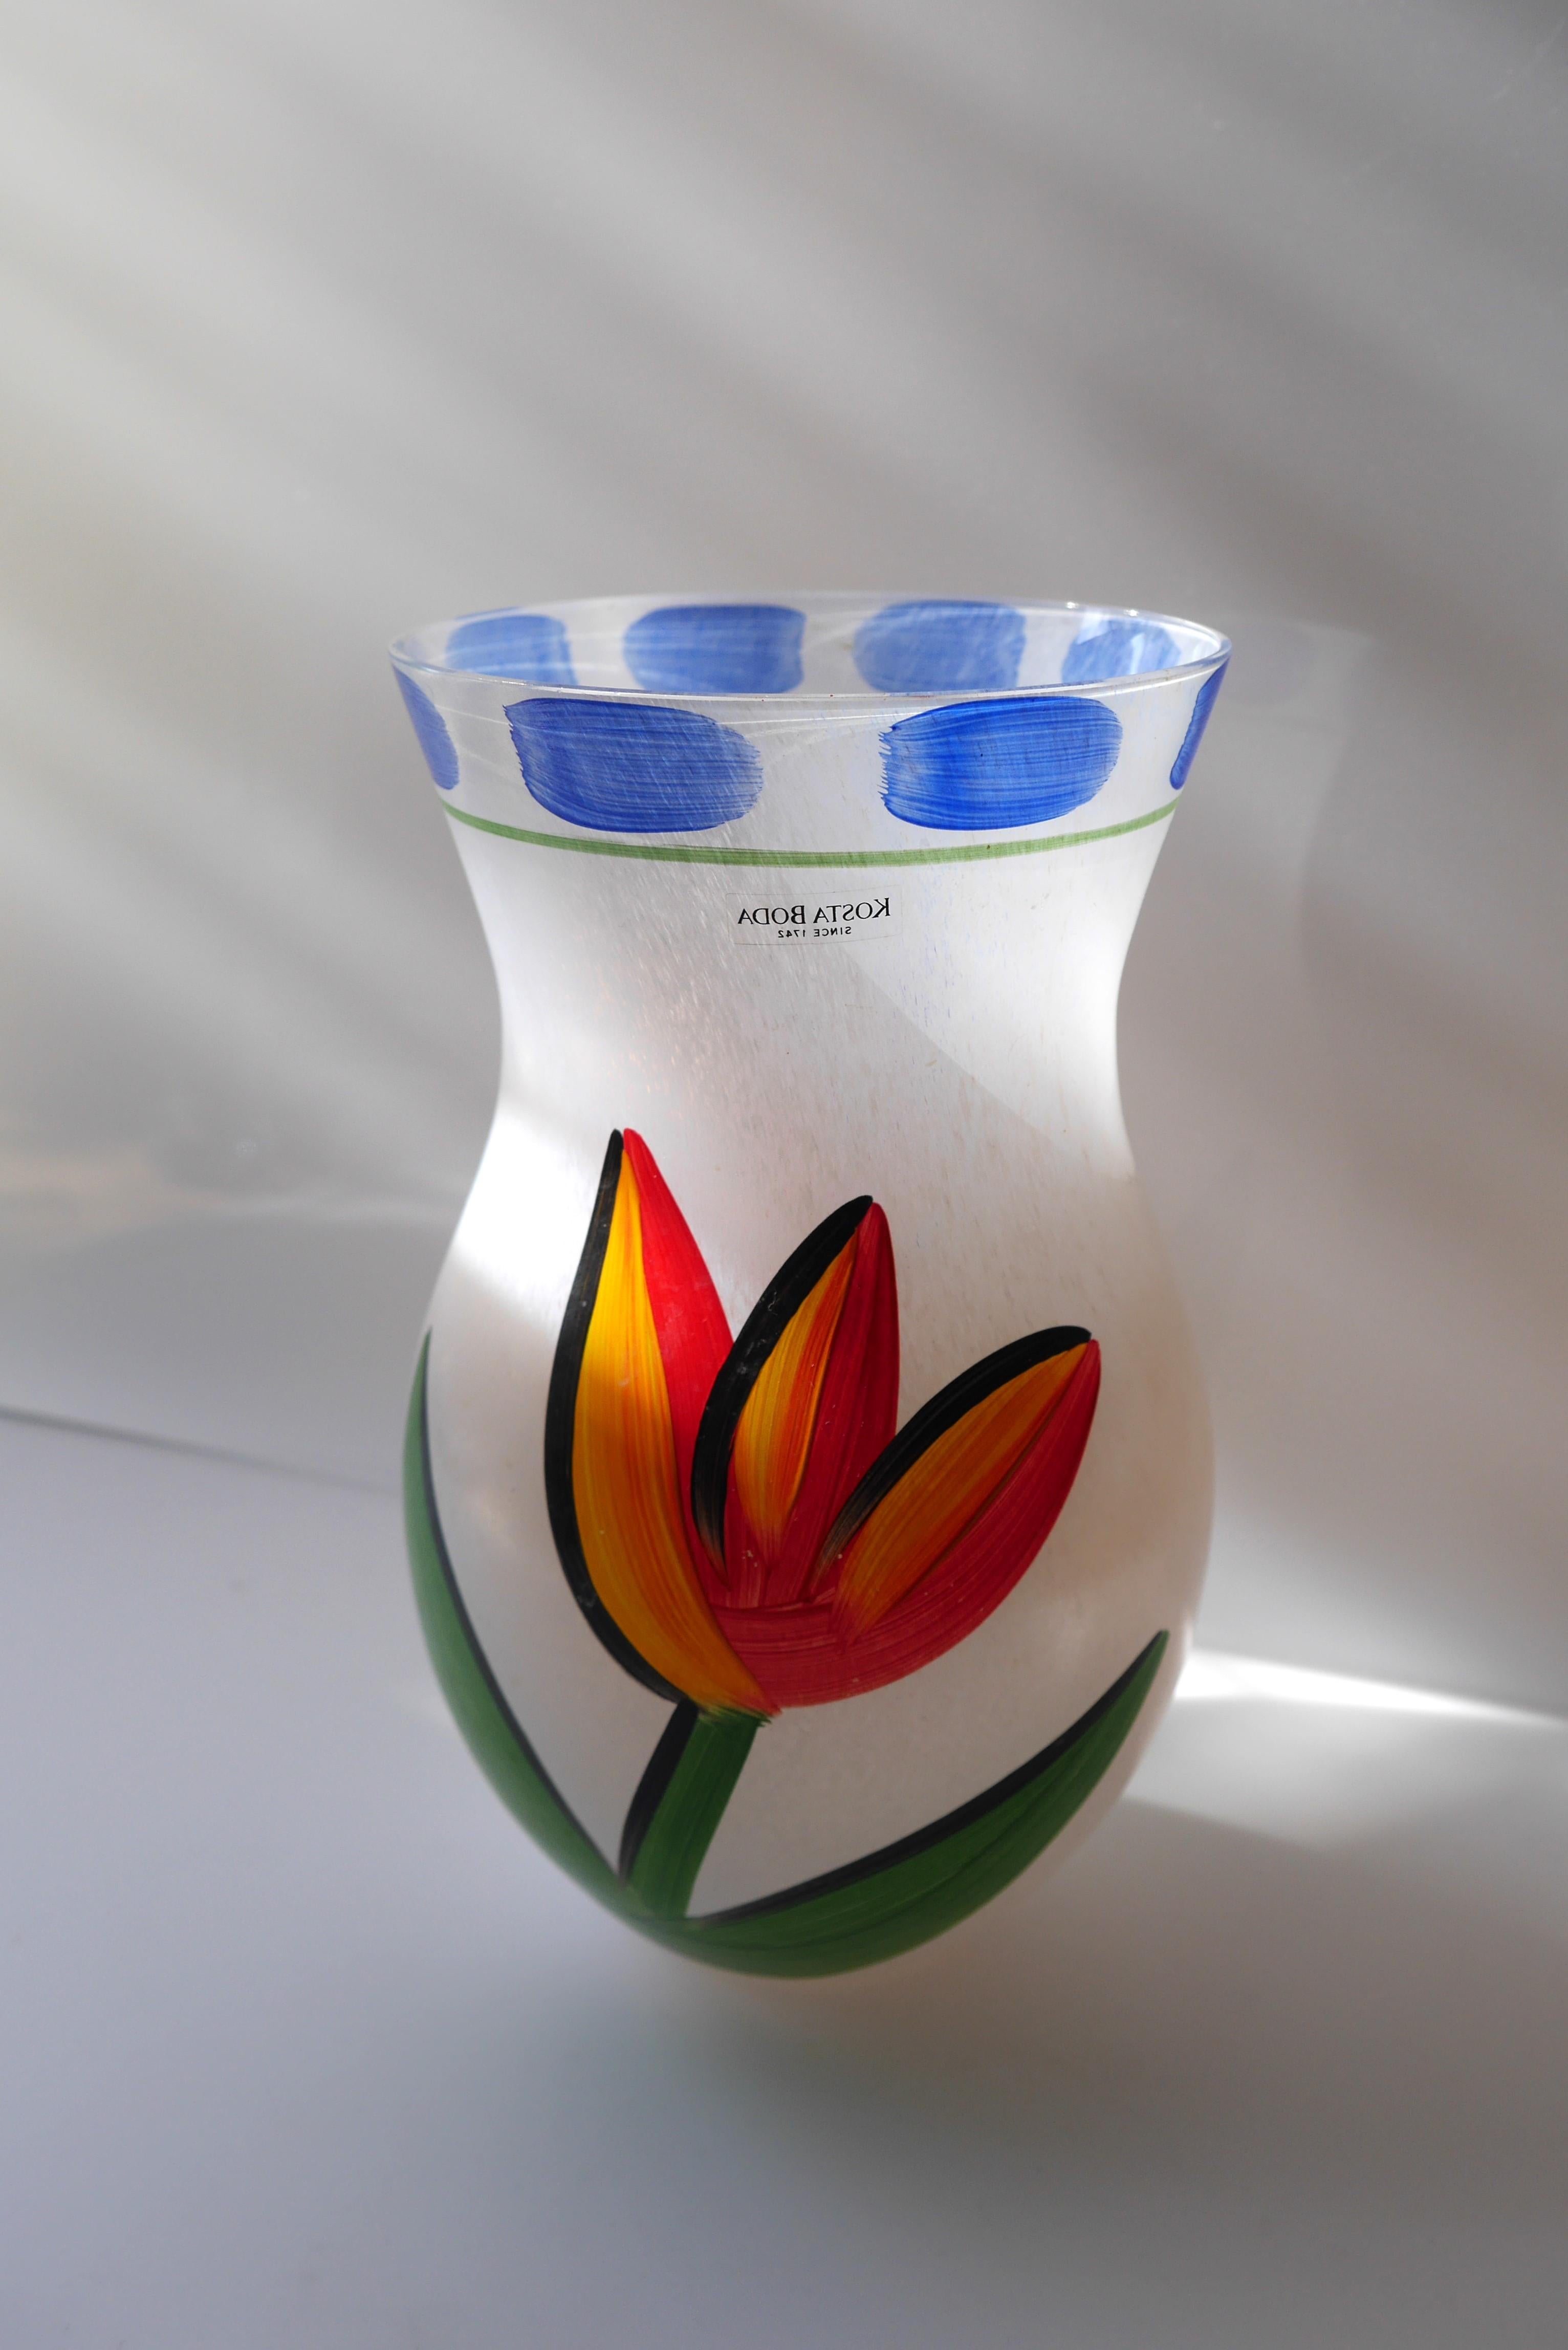 A signed and handmade and hand painted glass vase known as 